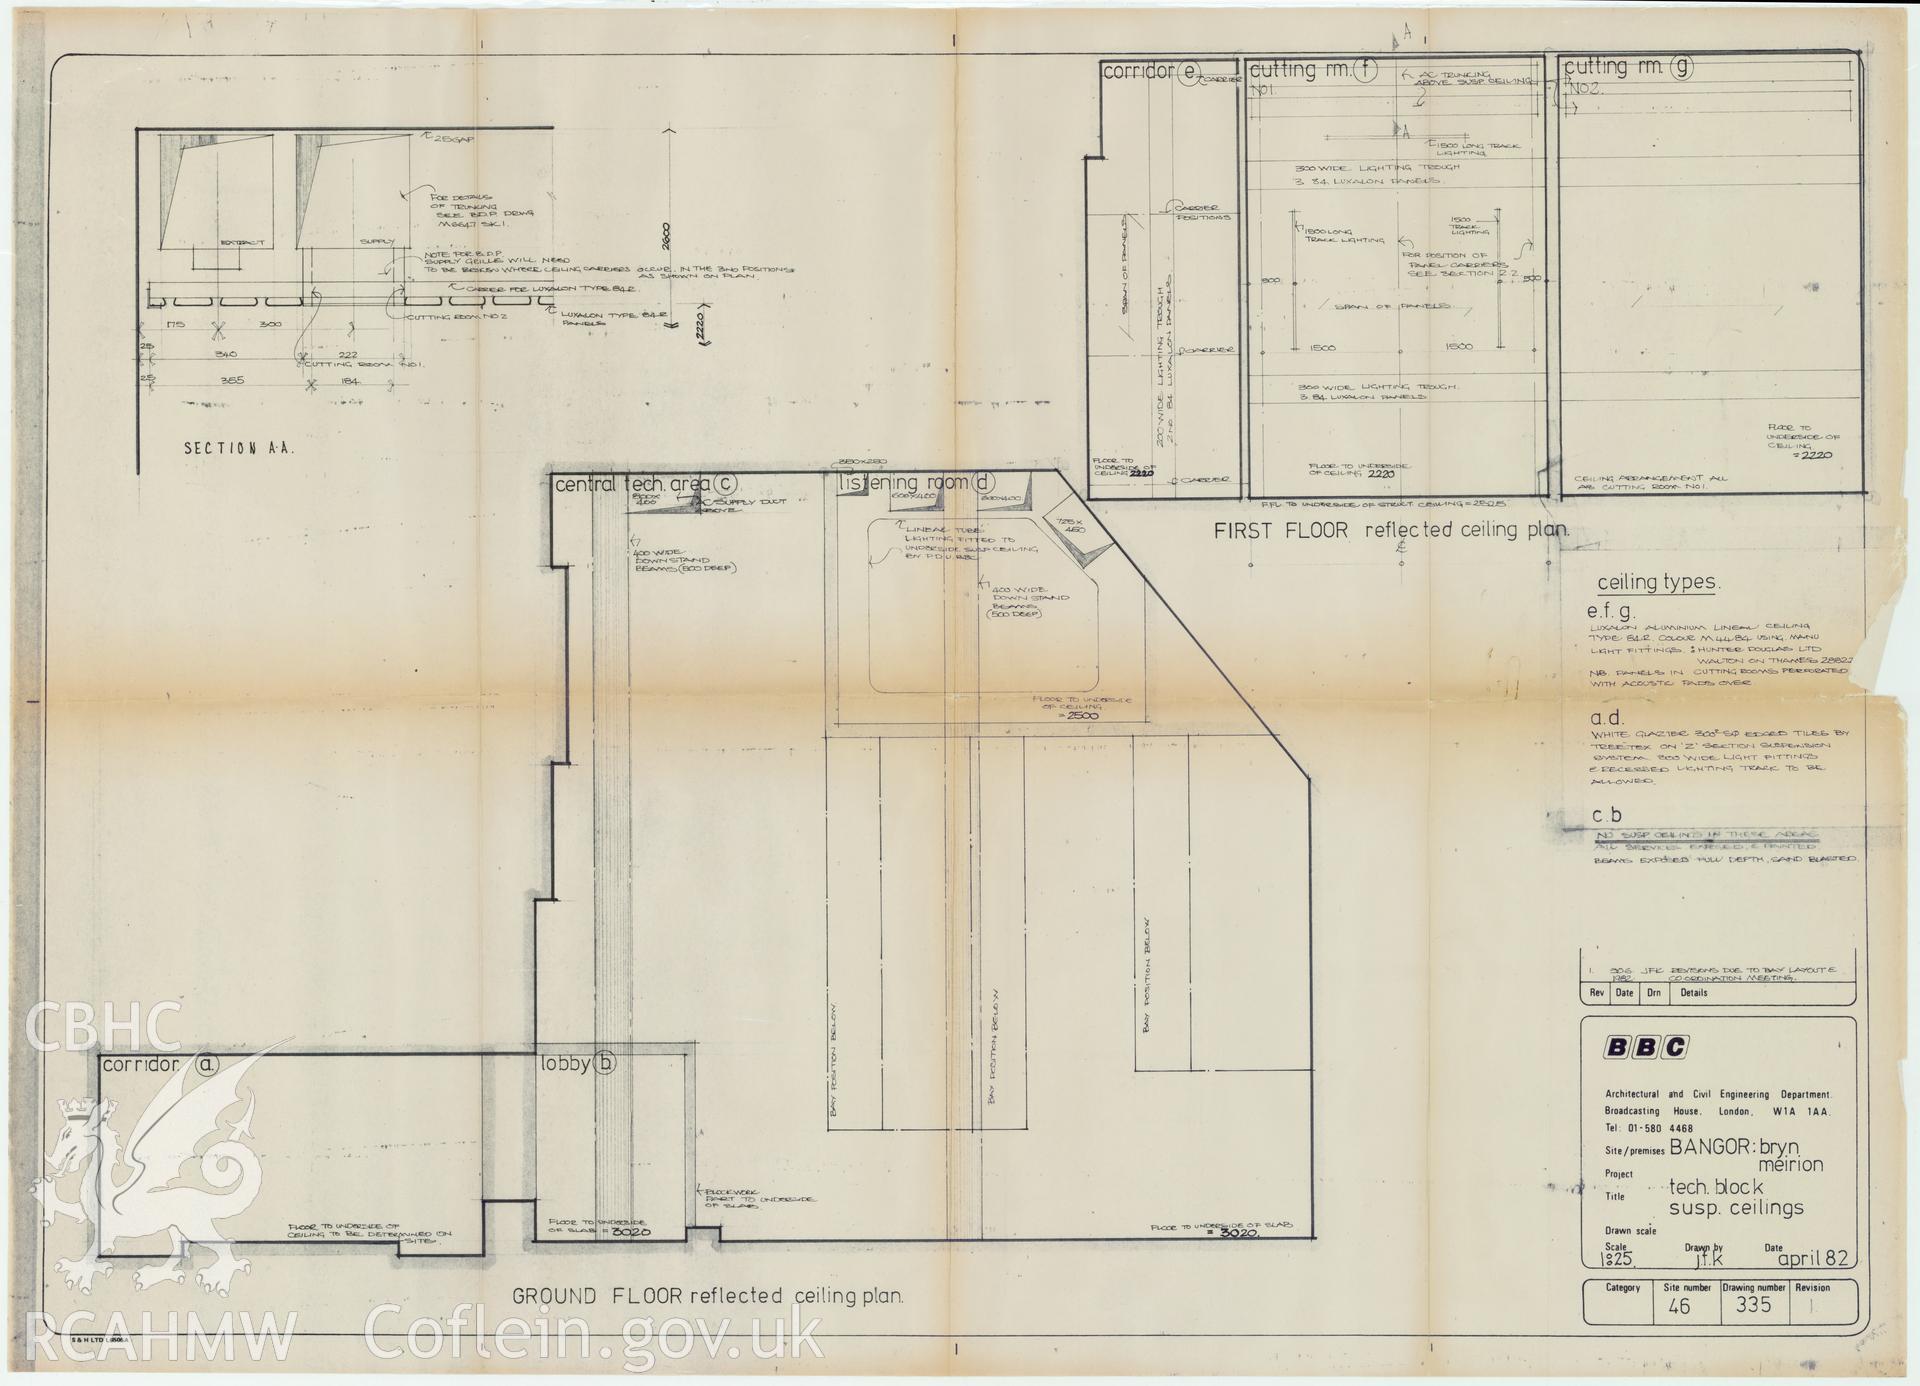 BBC premises, Bryn Meirion, Bangor - plan of the suspended ceiling of the Technology Block. Drawing No. 46/335 Rev1, April 1982.